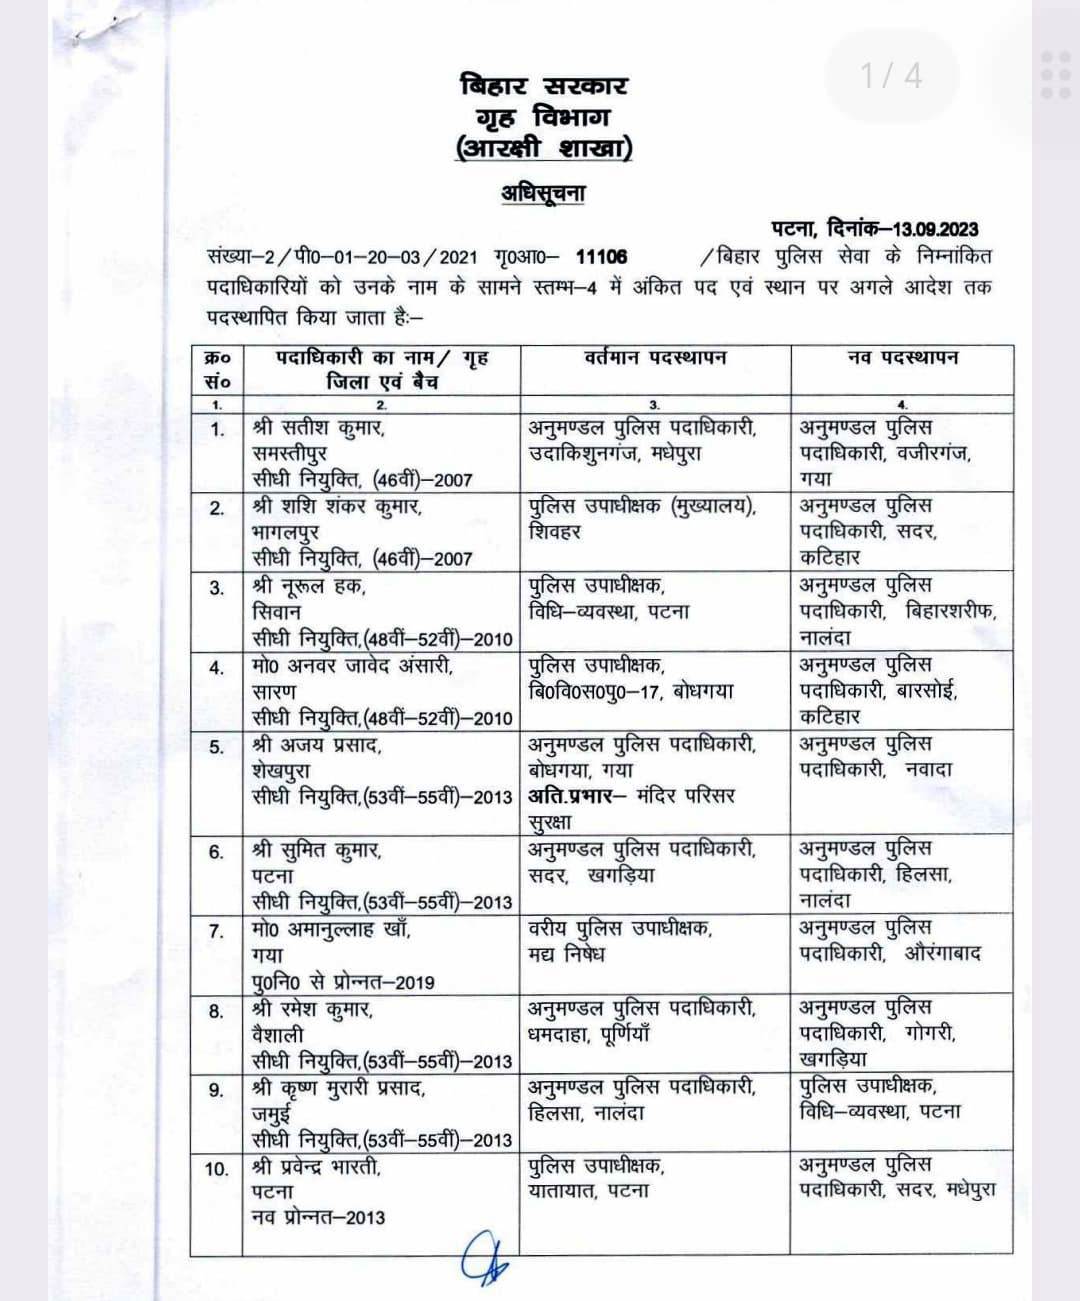 33 officers of Bihar Police Service including 2 famous IPS transferred see full list 2